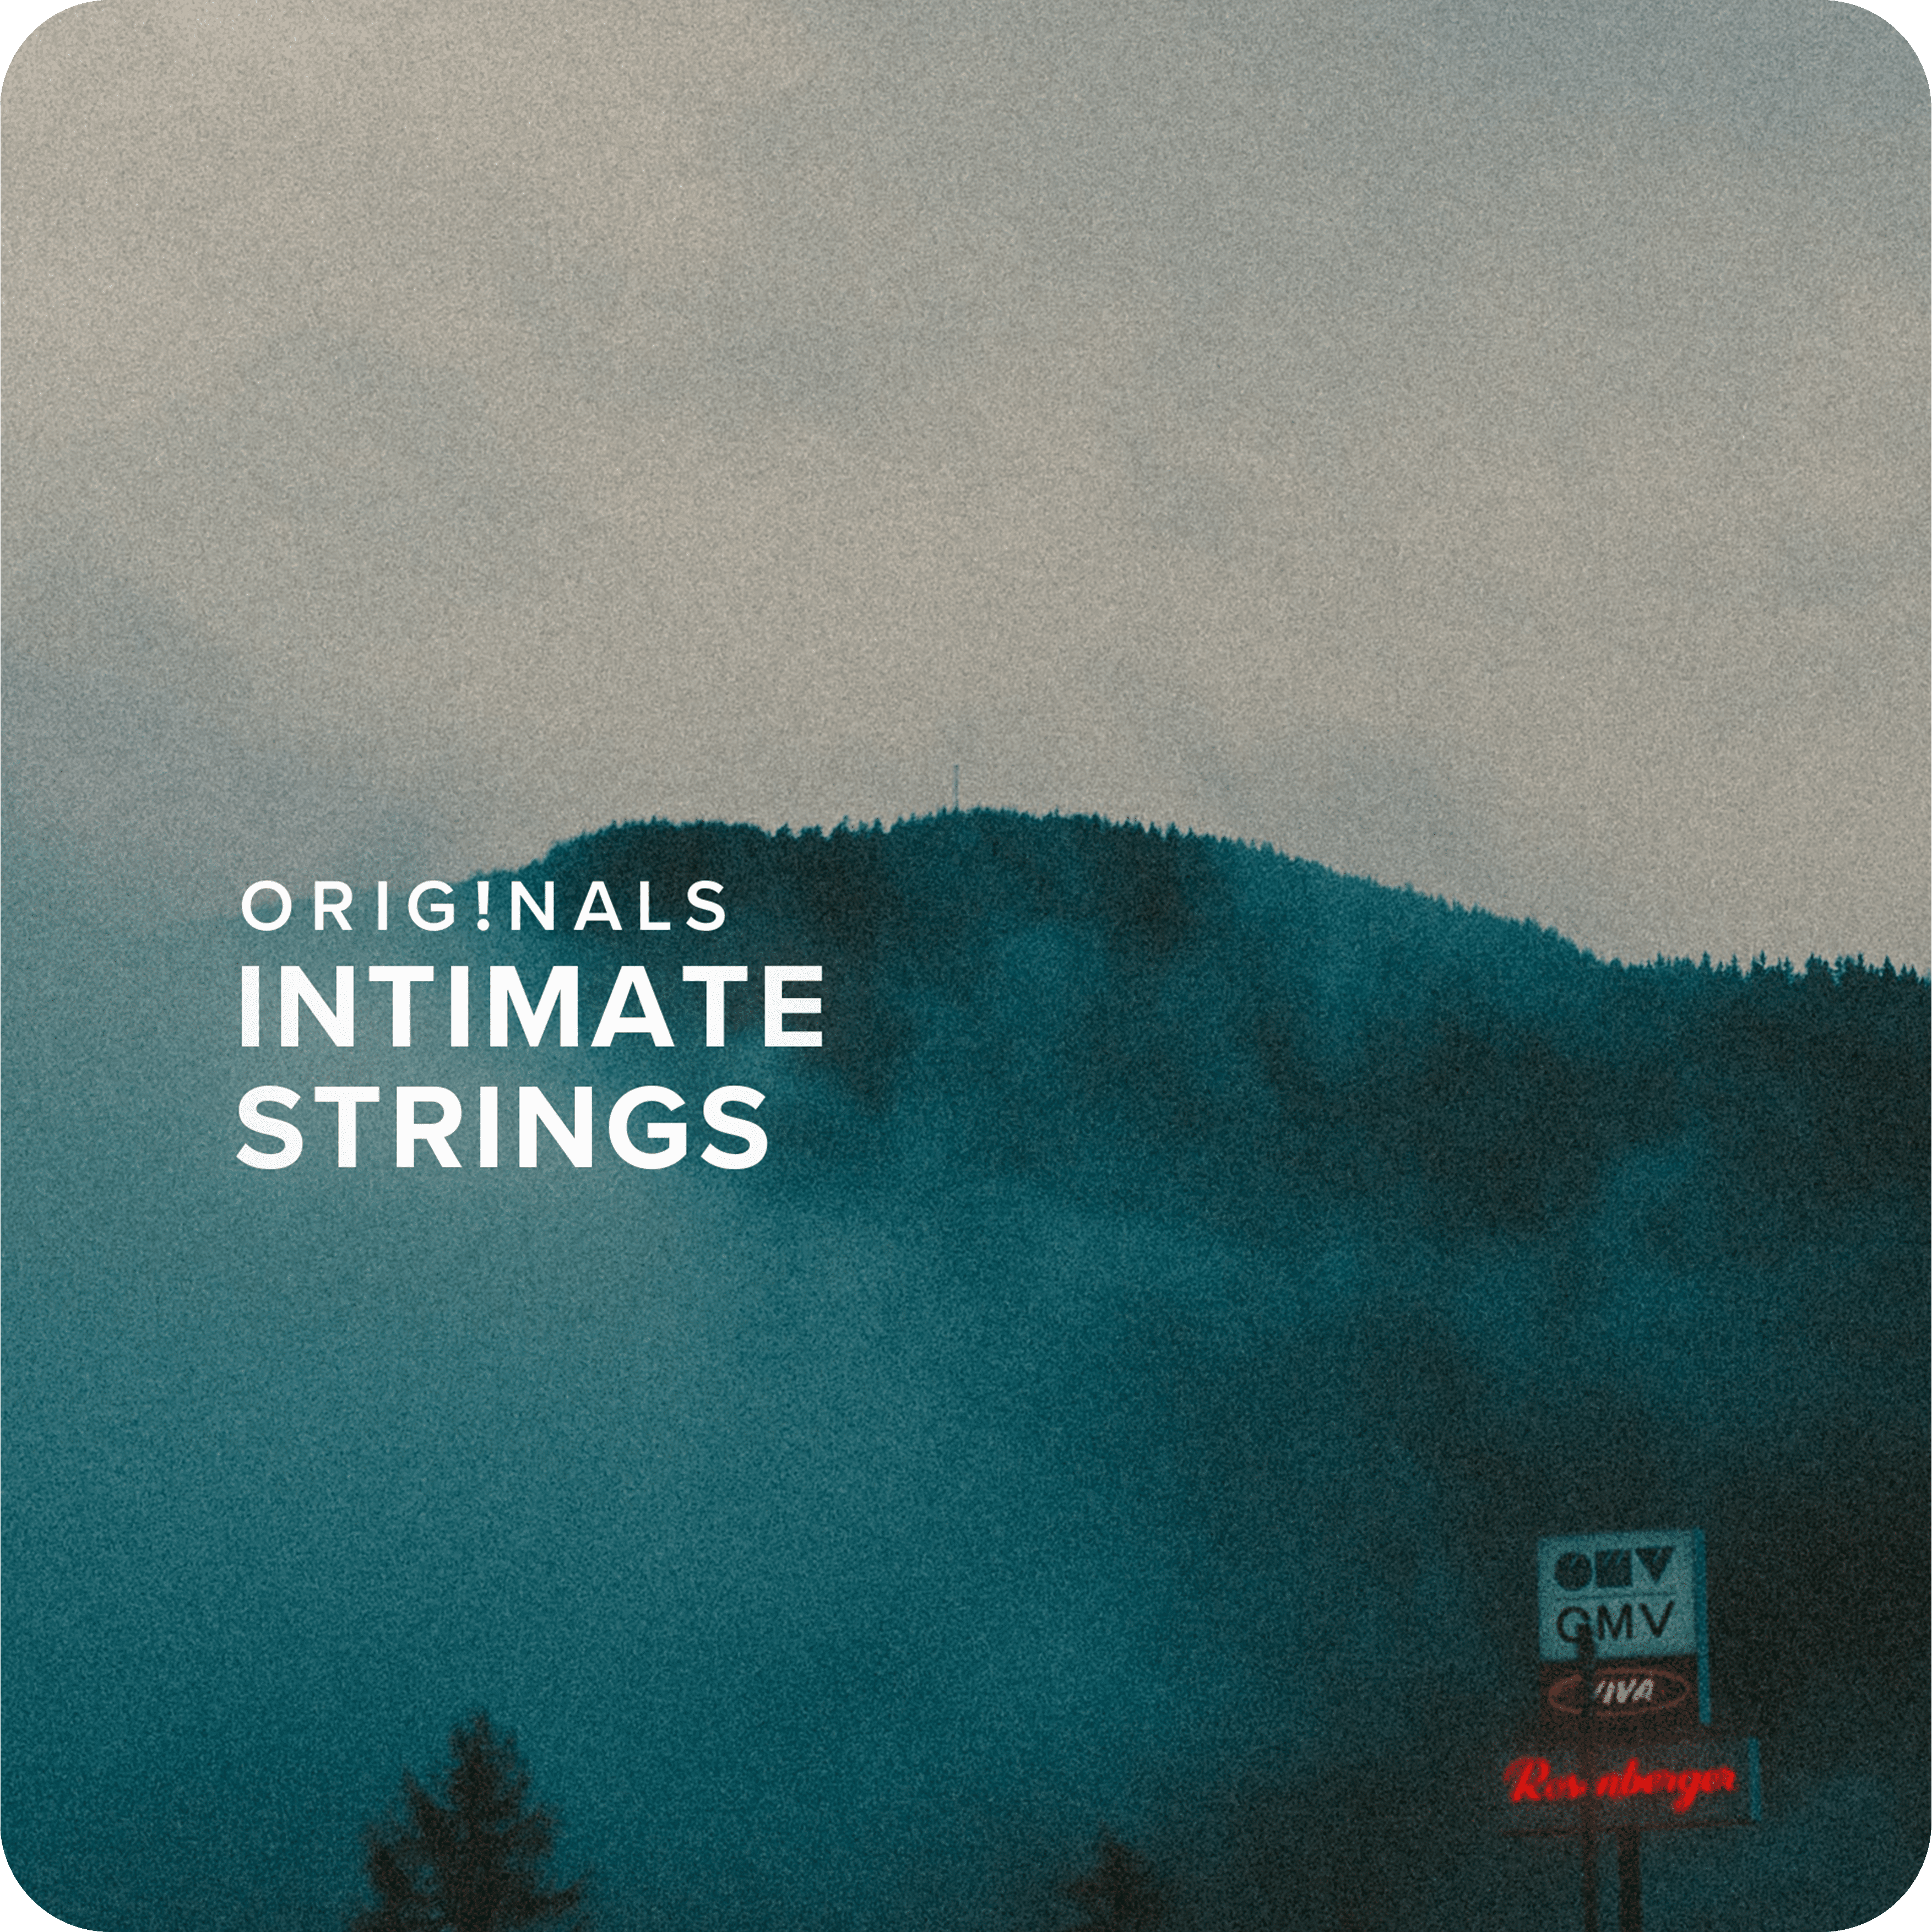 Spitfire Audio’s INTIMATE STRINGS the Next Big Intimate Cinematic Sound Ingredient